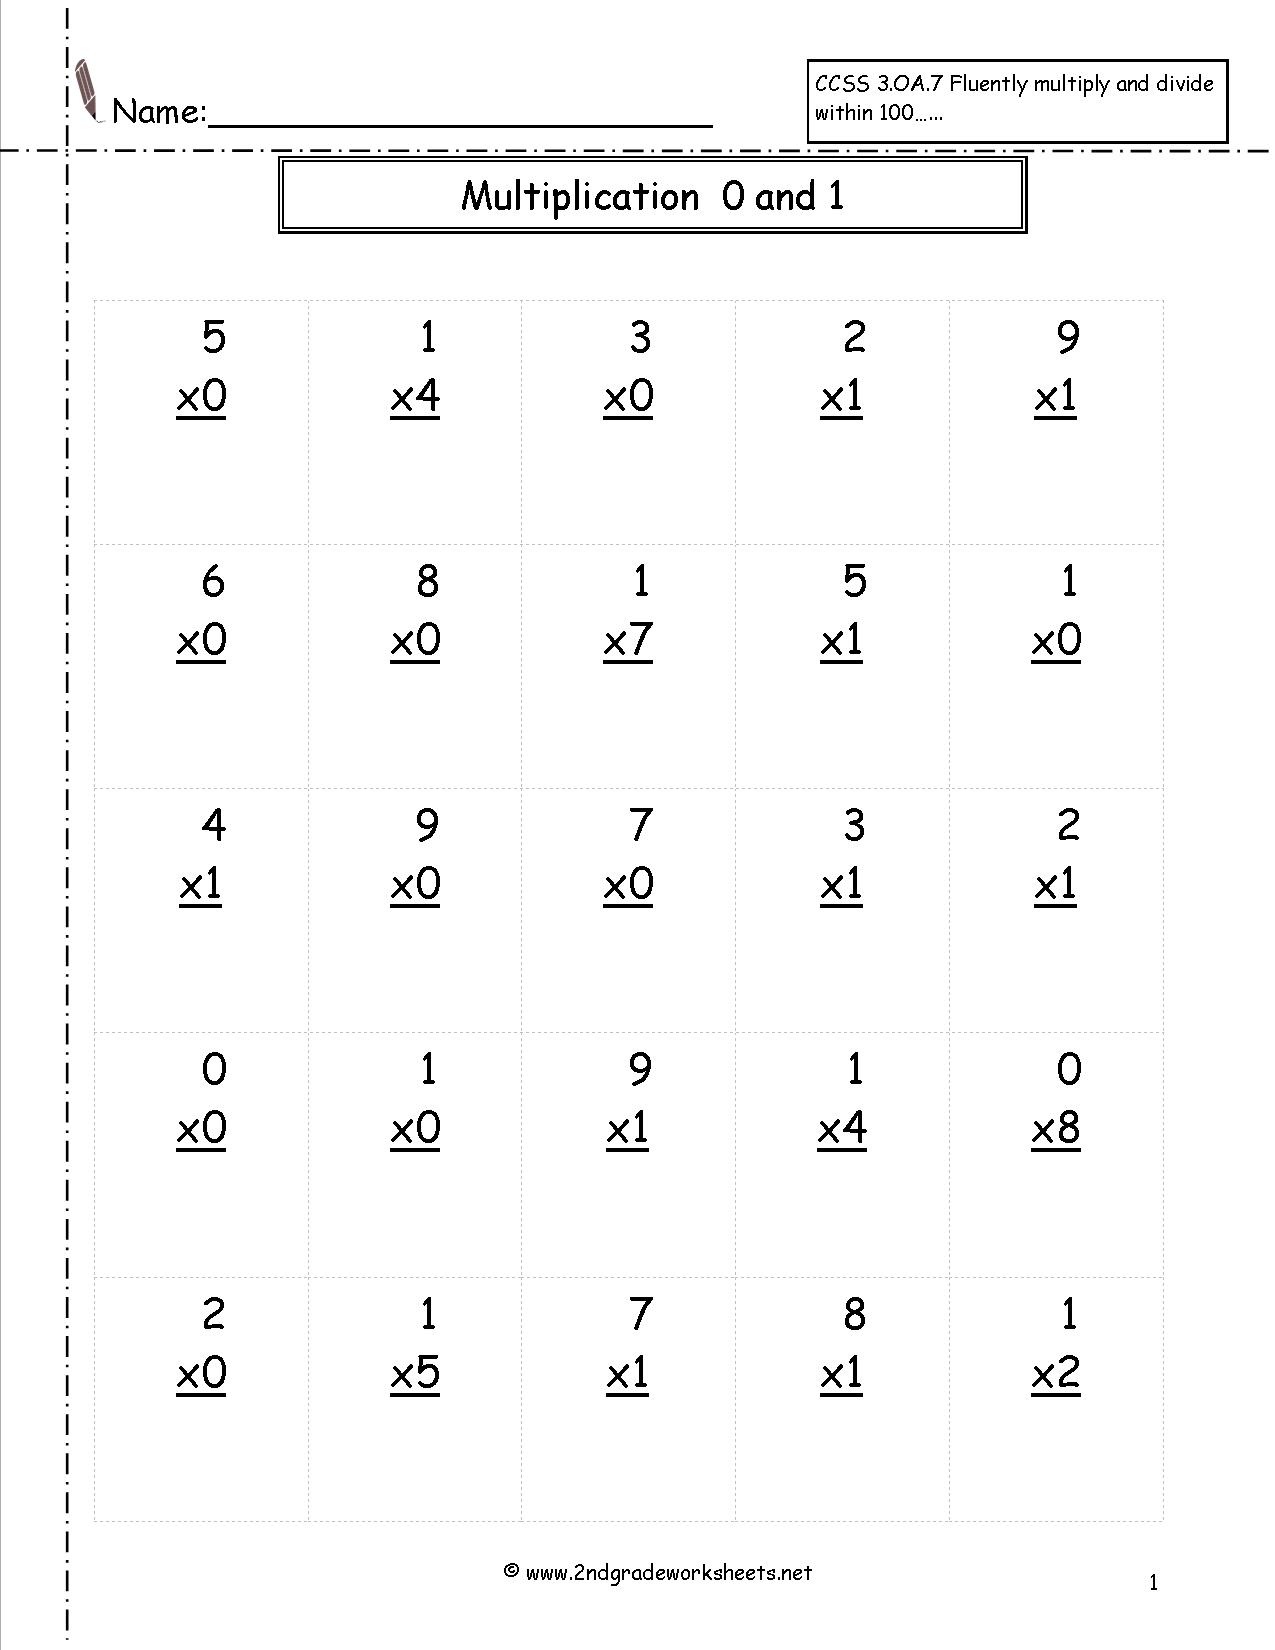 Multiplication Worksheets And Printouts - Free Printable Multiplication Worksheets